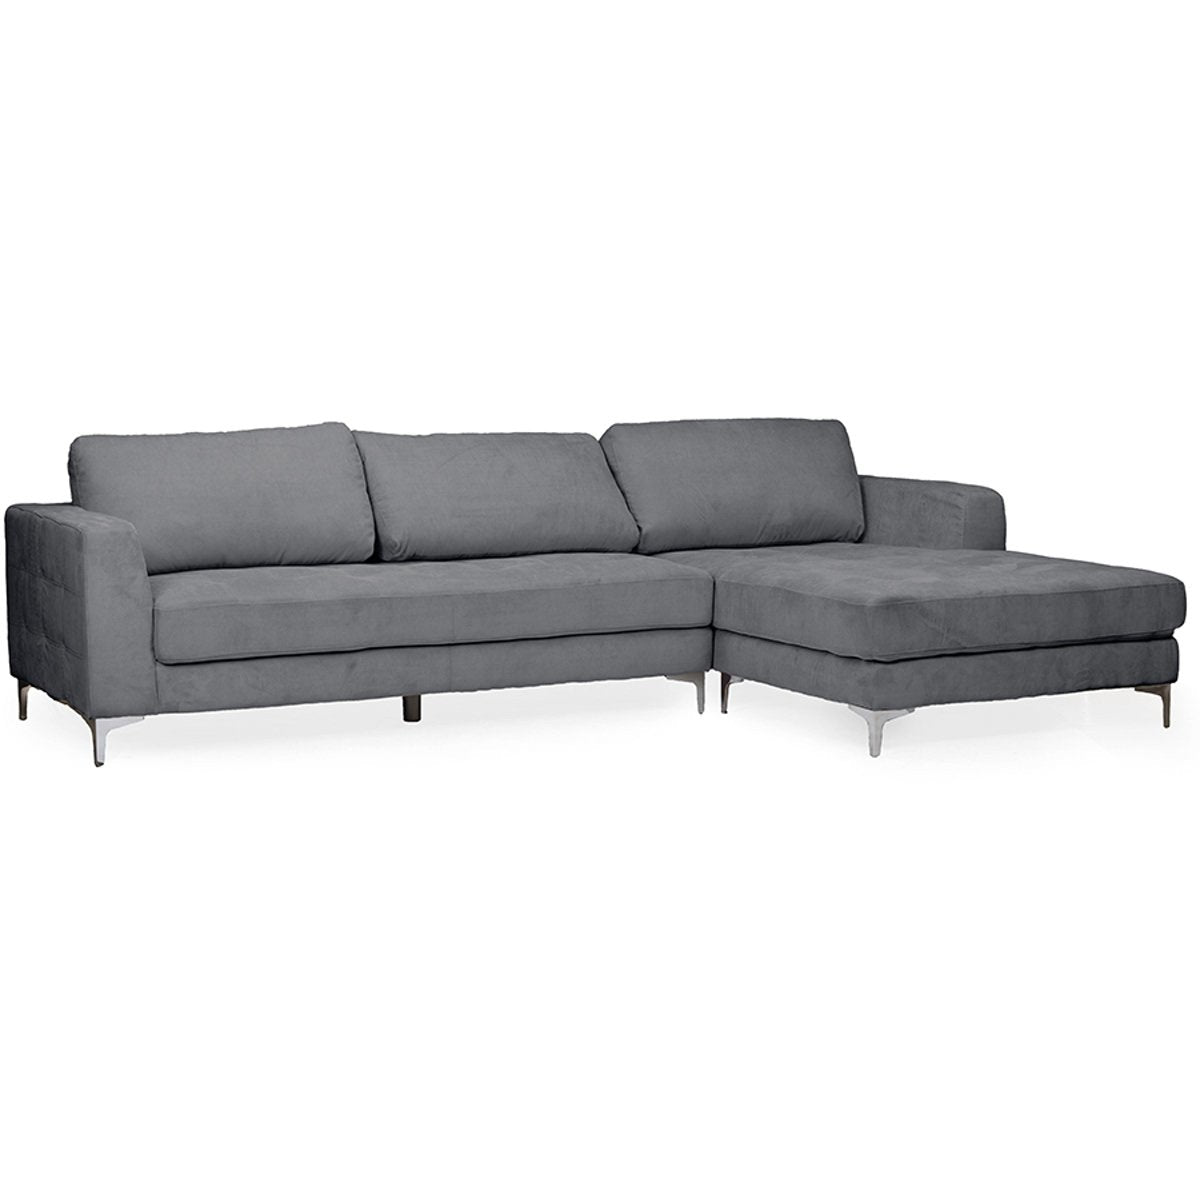 Baxton Studio Agnew Contemporary Light Beige Microfiber Right Facing Sectional Sofa Baxton Studio-sectionals-Minimal And Modern - 2